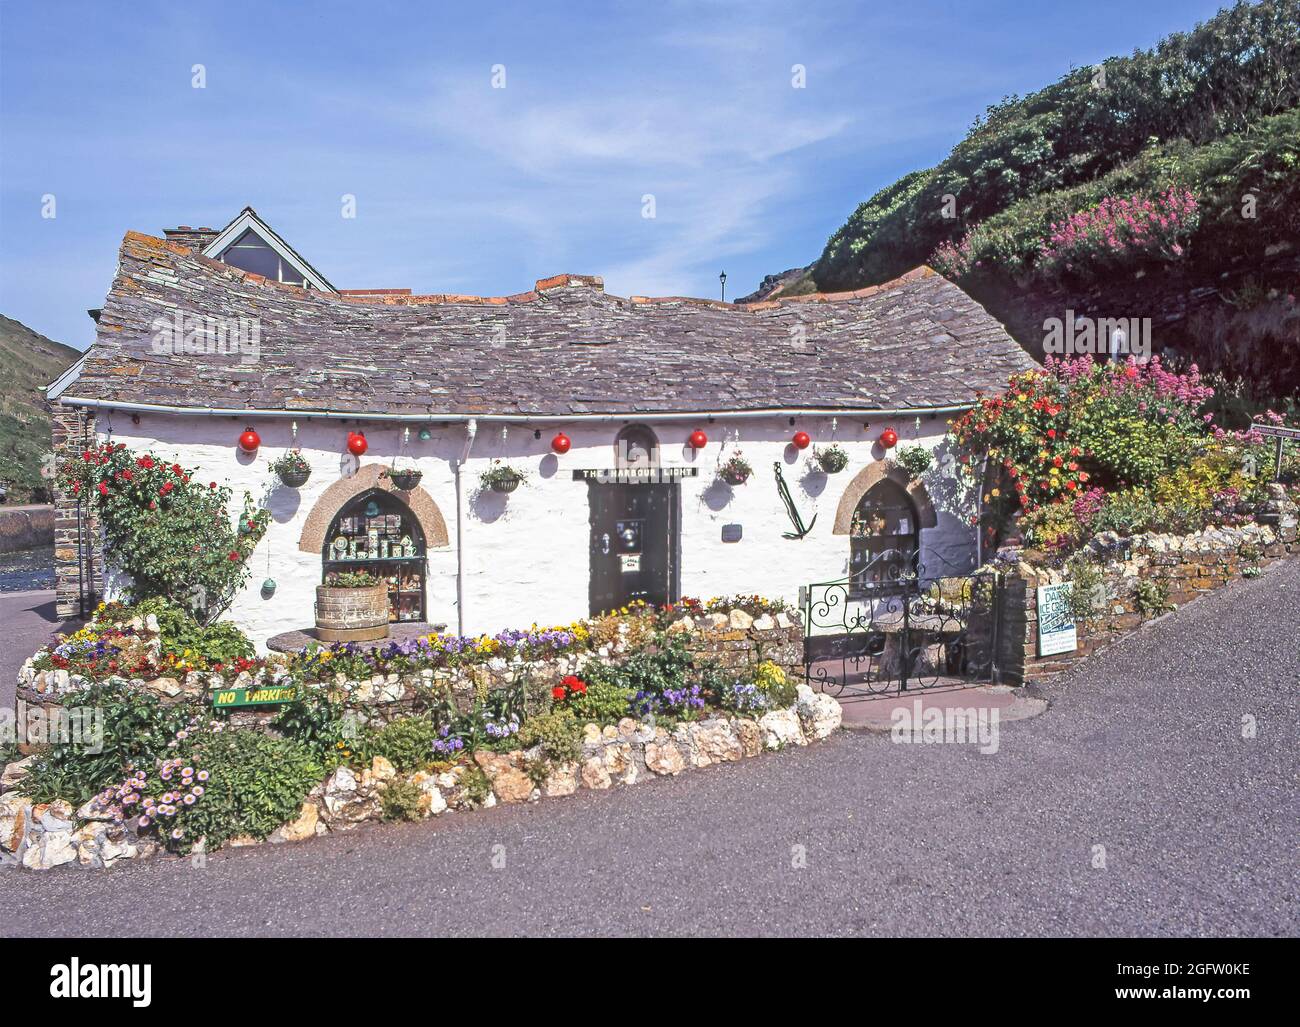 Archive view of picturesque1996 historical 1990s riverside Grade II Listed Building The Harbour Light Pixie souvenir shop with garden flowers converted from stables opening as a touristy gift shop beside River Valency seen on left later destroyed in 2004 flood & rebuilt as tea room an archival image from the way we were in the 90s in Boscastle Cornwall England UK Stock Photo